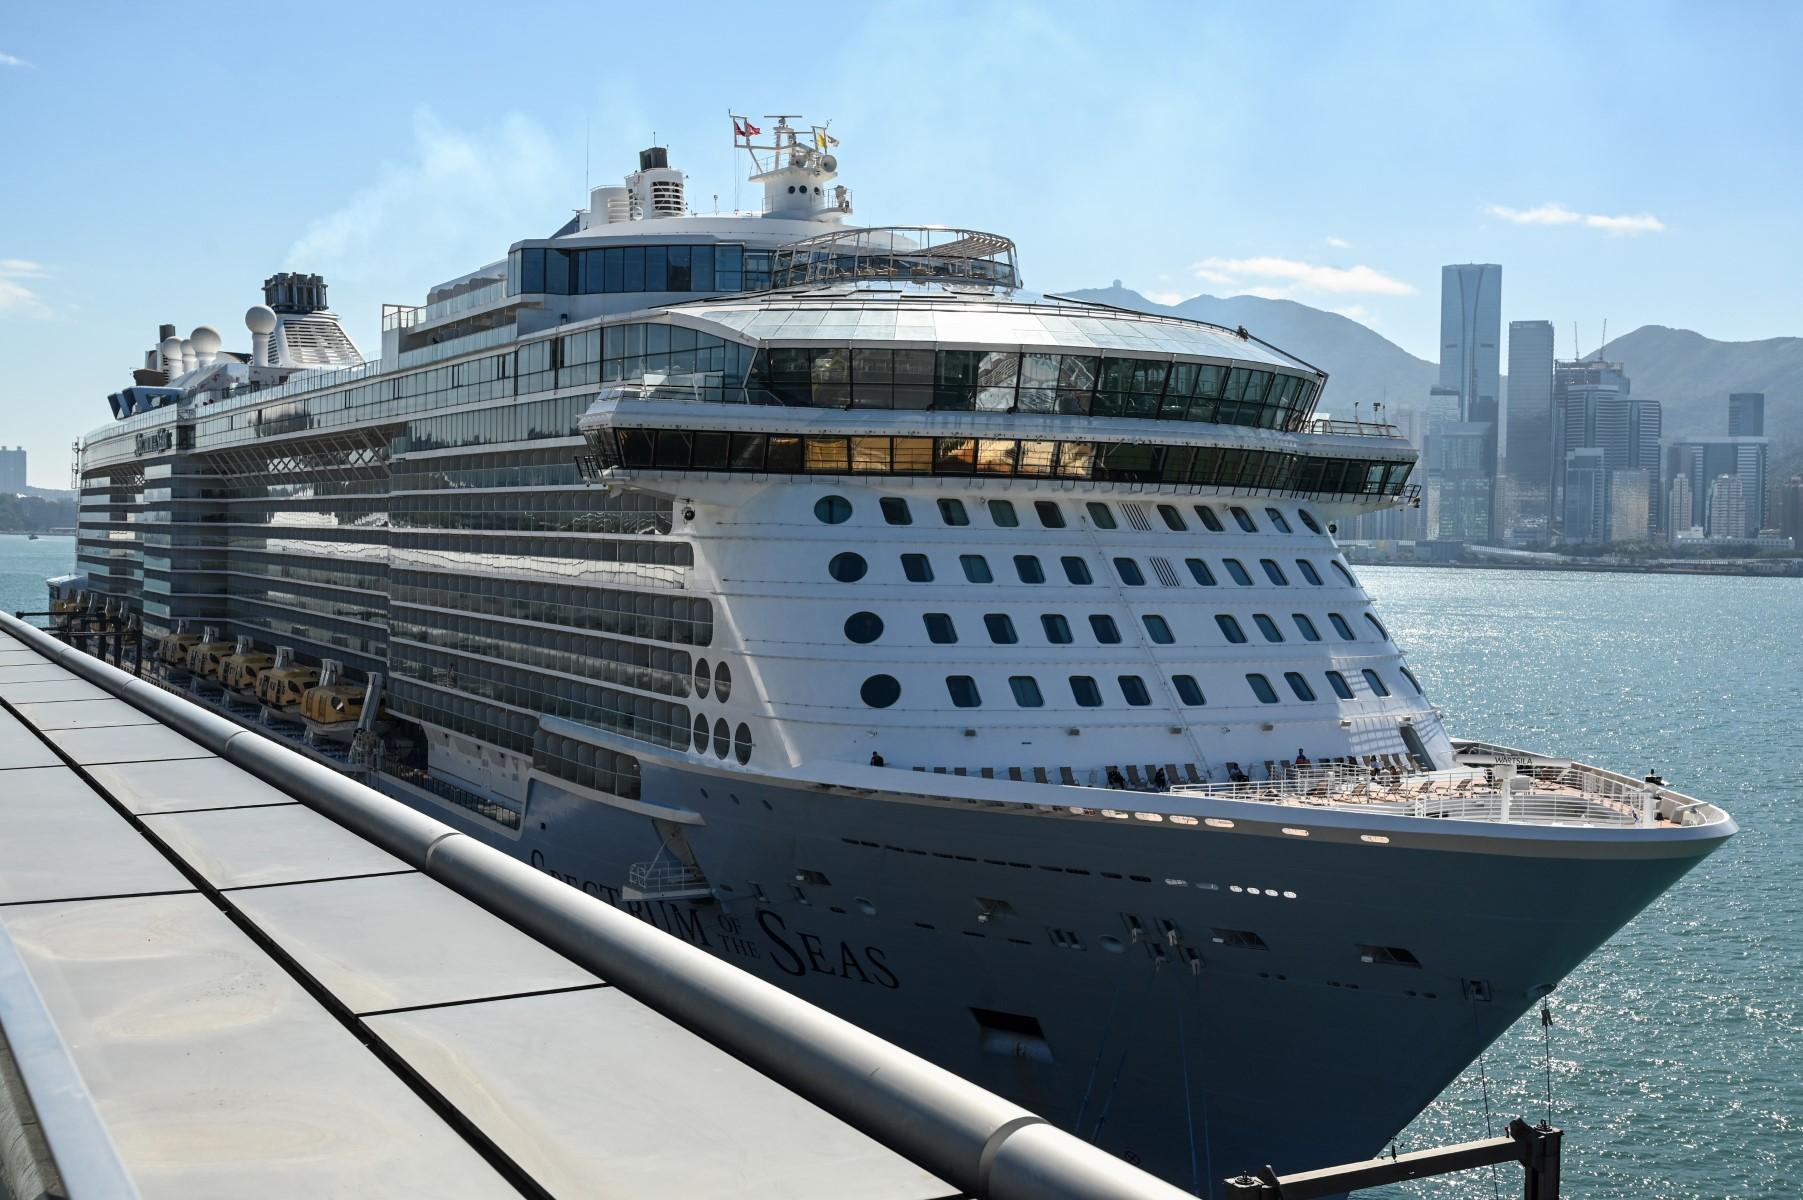 The cruise ship 'Spectrum of the Seas' is docked at a terminal in Hong Kong on Jan 5, after it was ordered to return to the city for Covid-19 testing after nine people were found to be close contacts with a recent Omicron variant outbreak. Photo: AFP